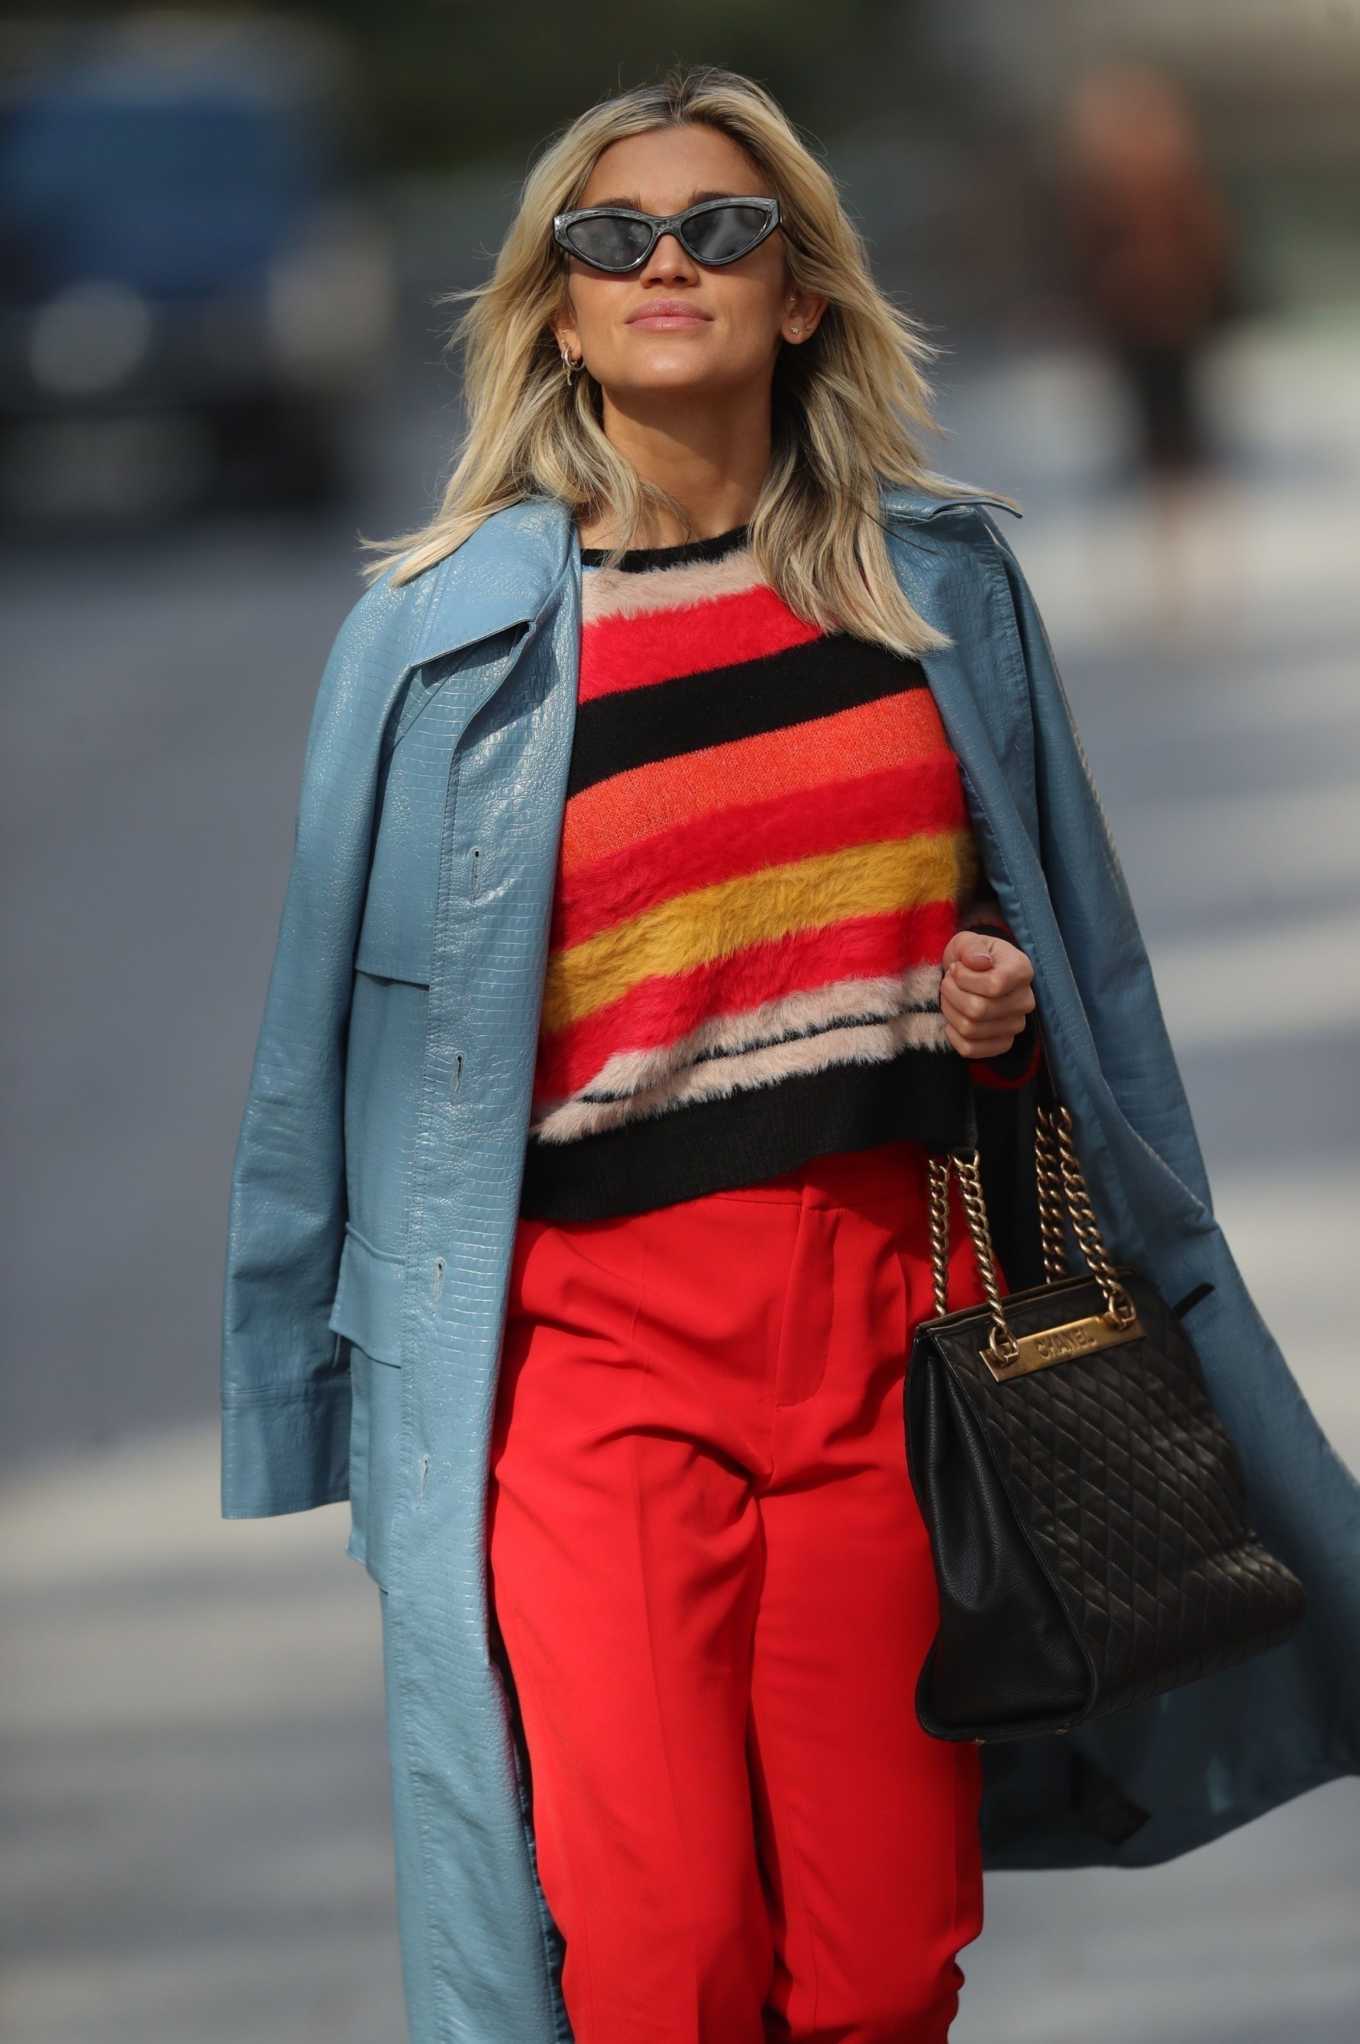 Ashley Roberts â€“ Seen leaving Heart Radio in red trouser and YSL Handbag in London